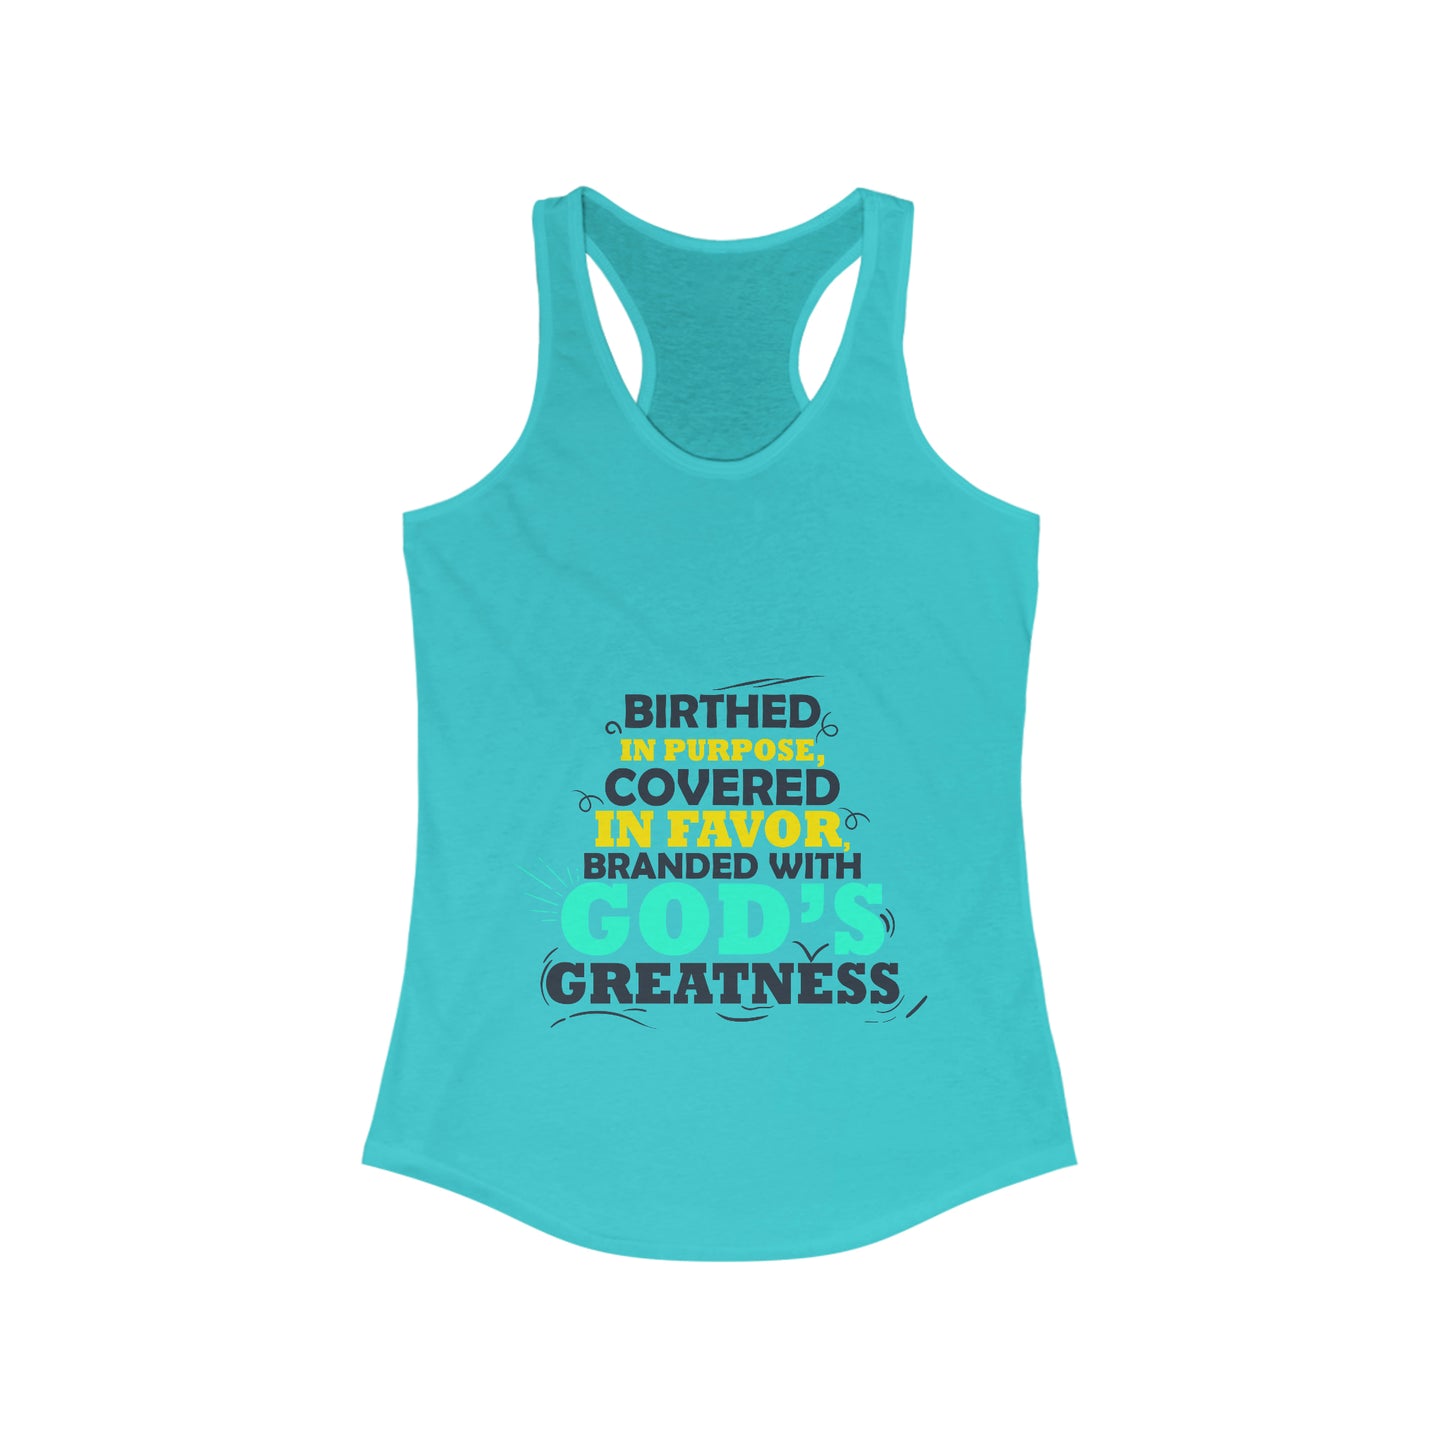 Birthed In Purpose, Covered in Favor, Branded With God's Greatness Slim Fit Tank-top